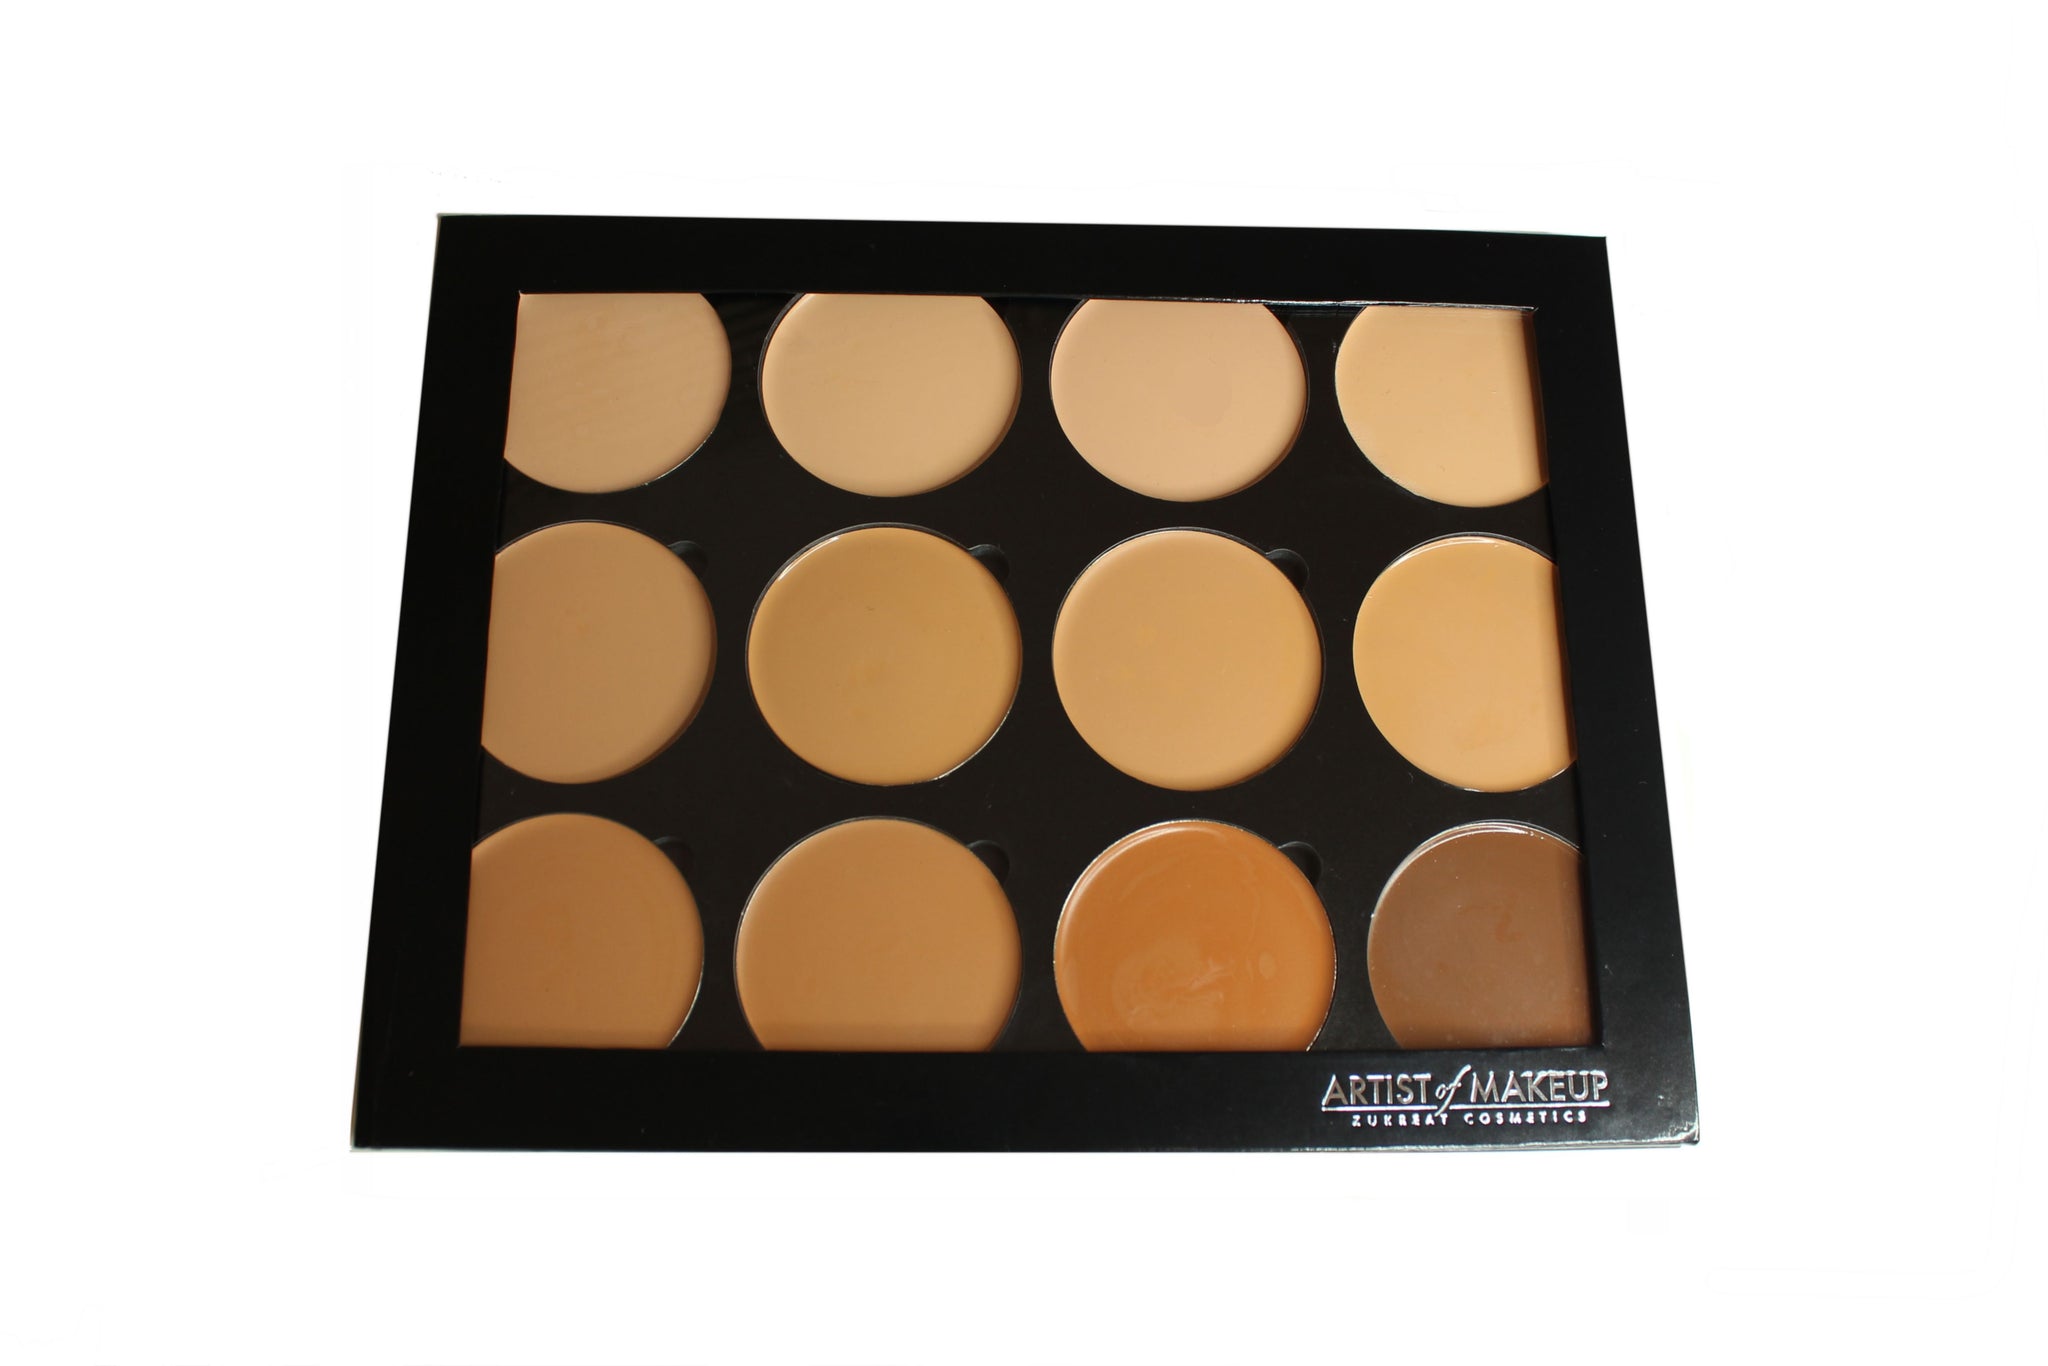 Pro 12 Flawless Foundation Palette of Makeup